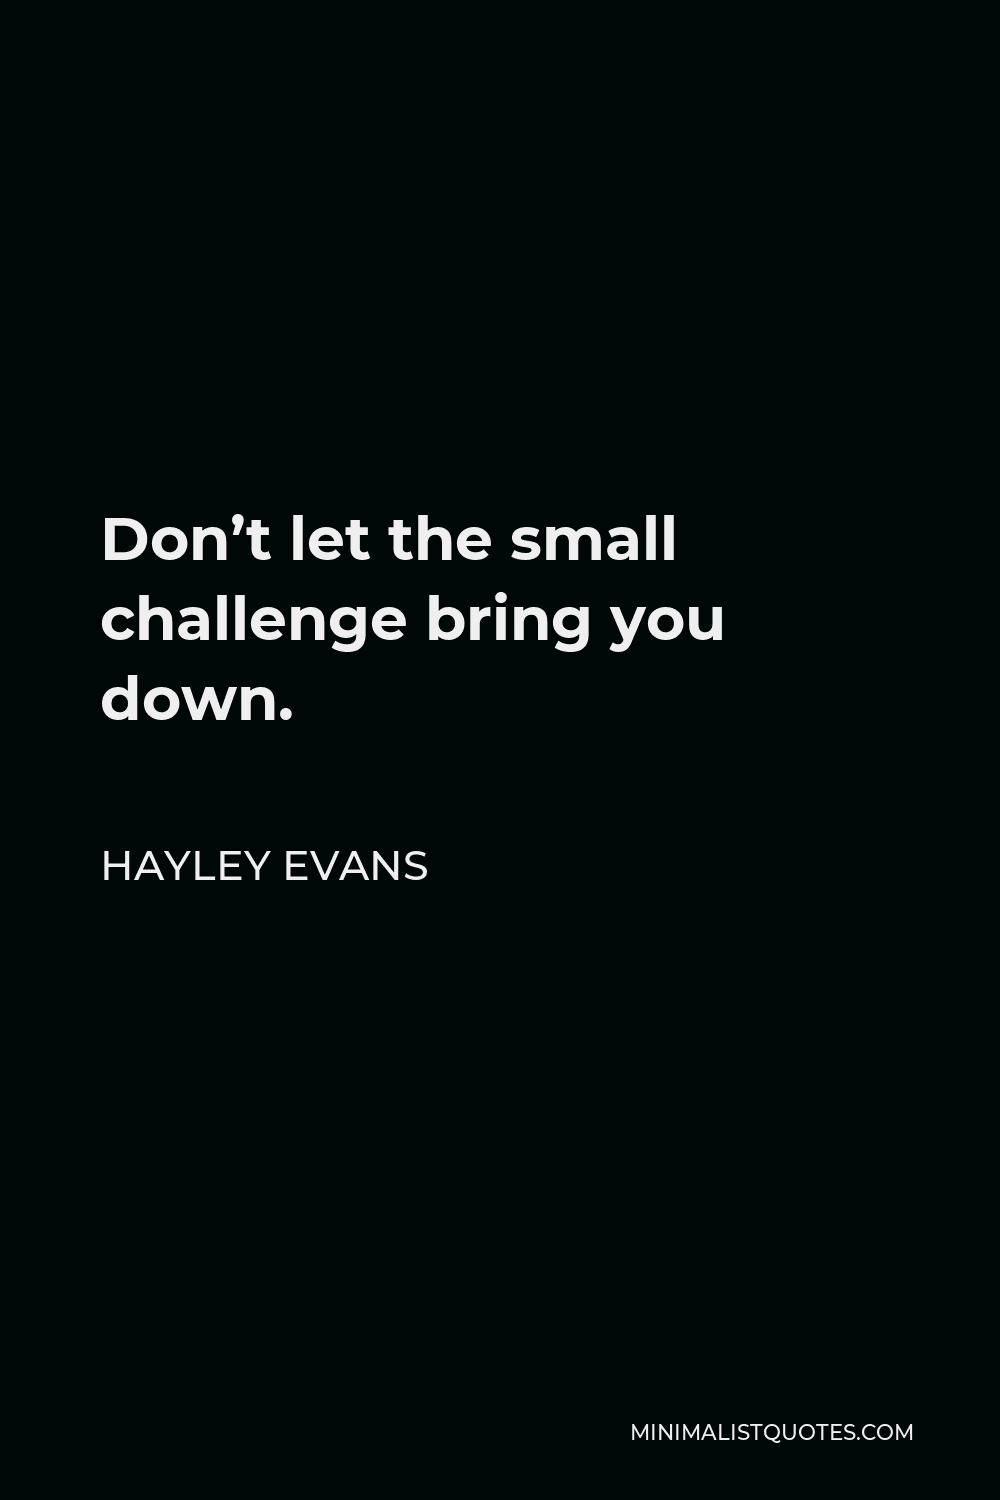 Hayley Evans Quote - Don’t let the small challenge bring you down.